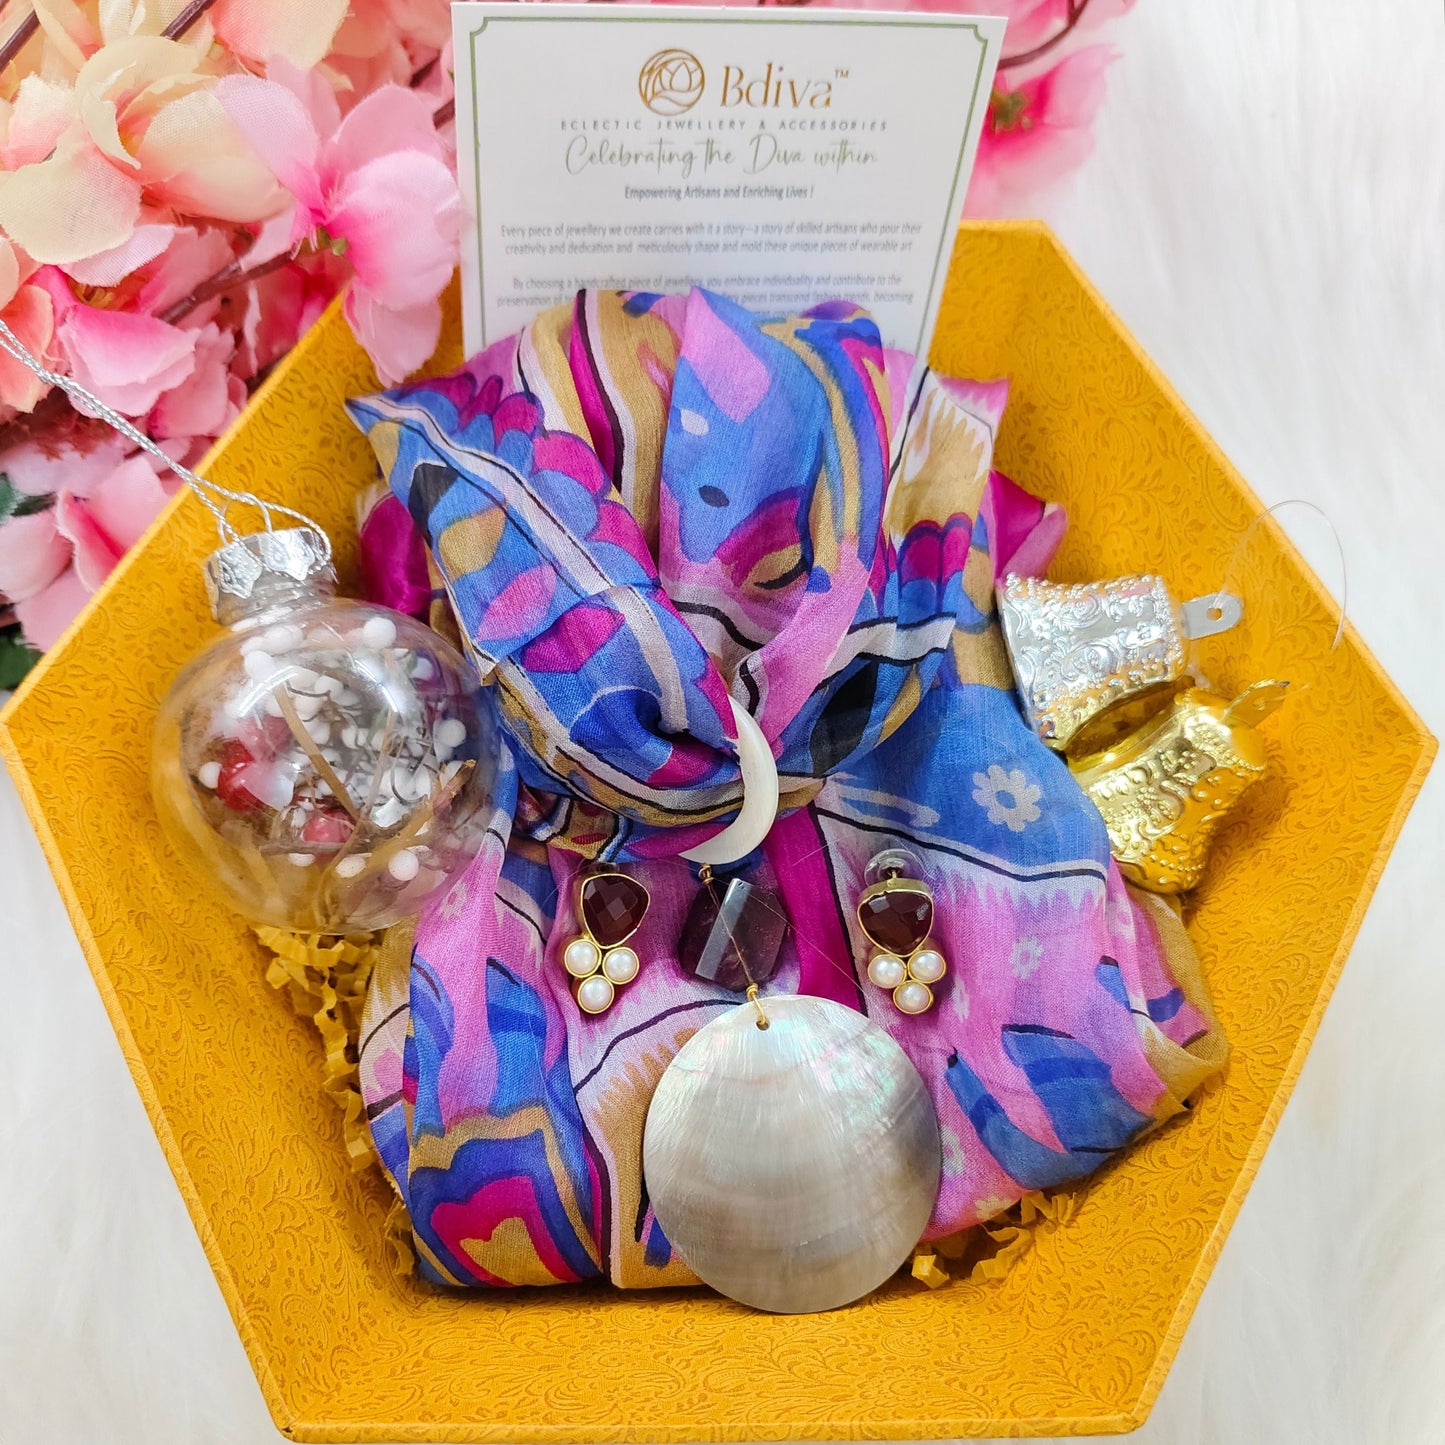 Shine Bright this Christmas With Our Scarf Hamper